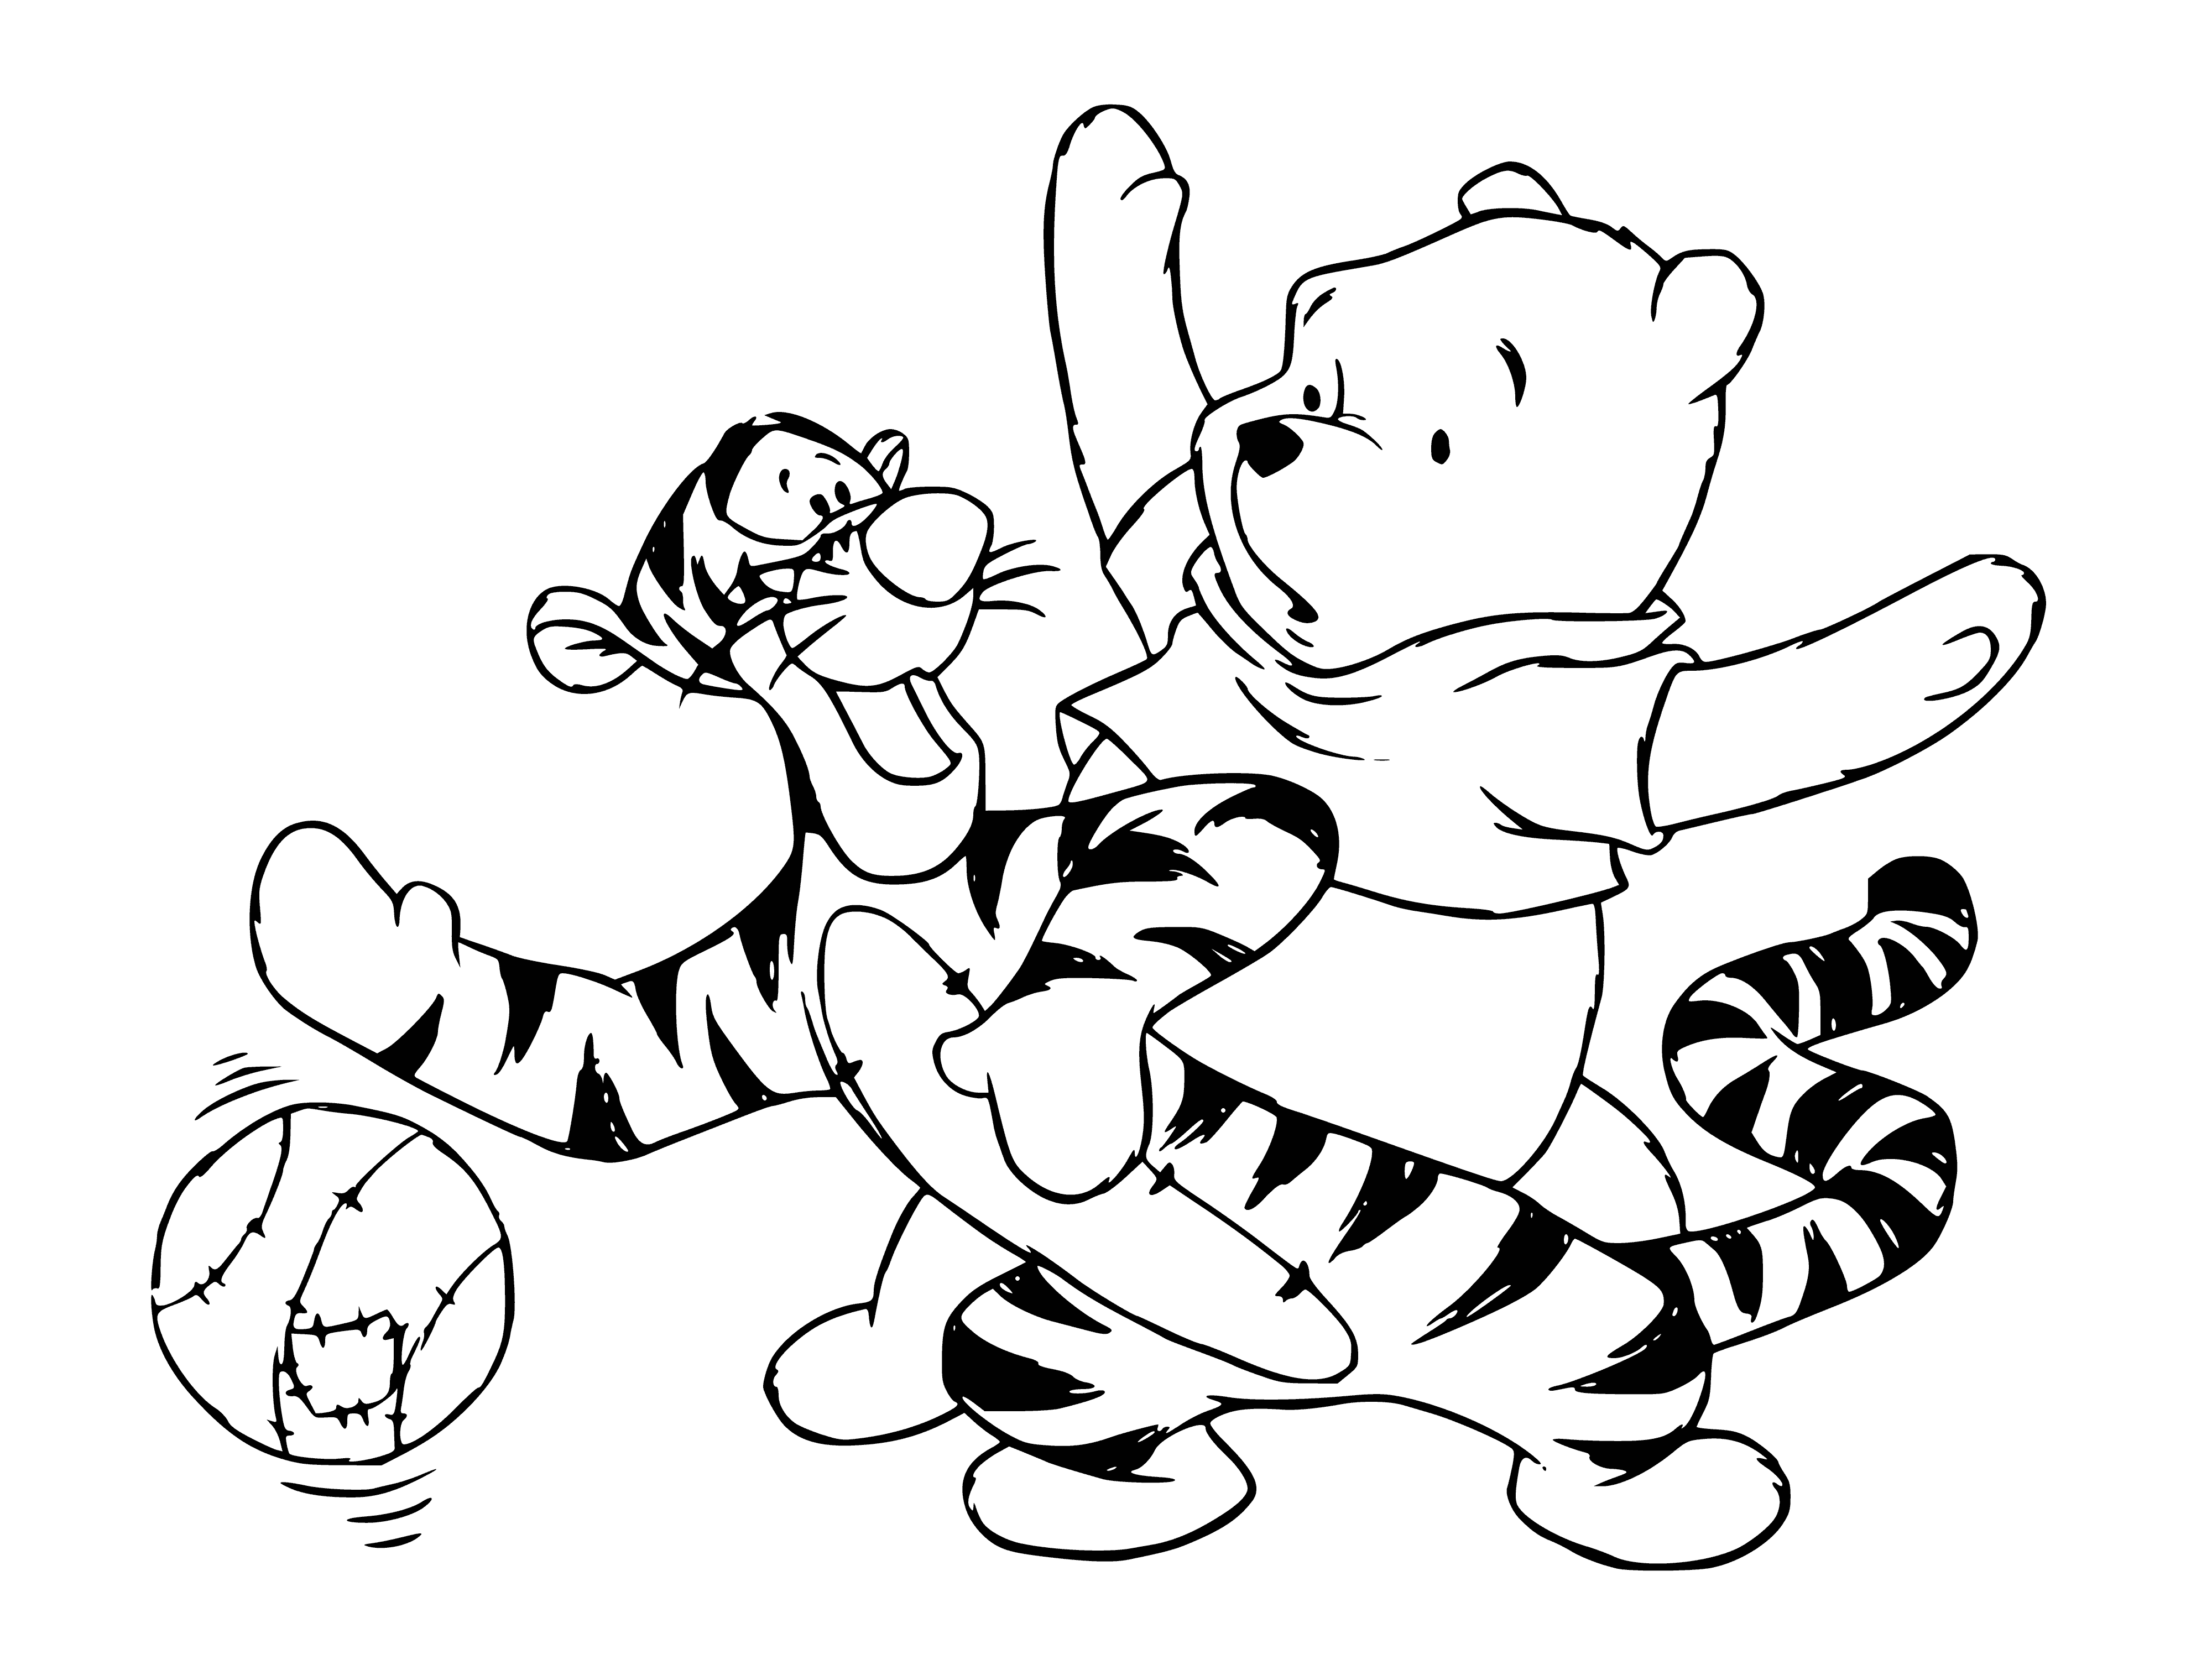 coloring page: Teddy bear and tiger cuddle: bear is lying, tiger's standing and holding bear's paw in mouth. #animals